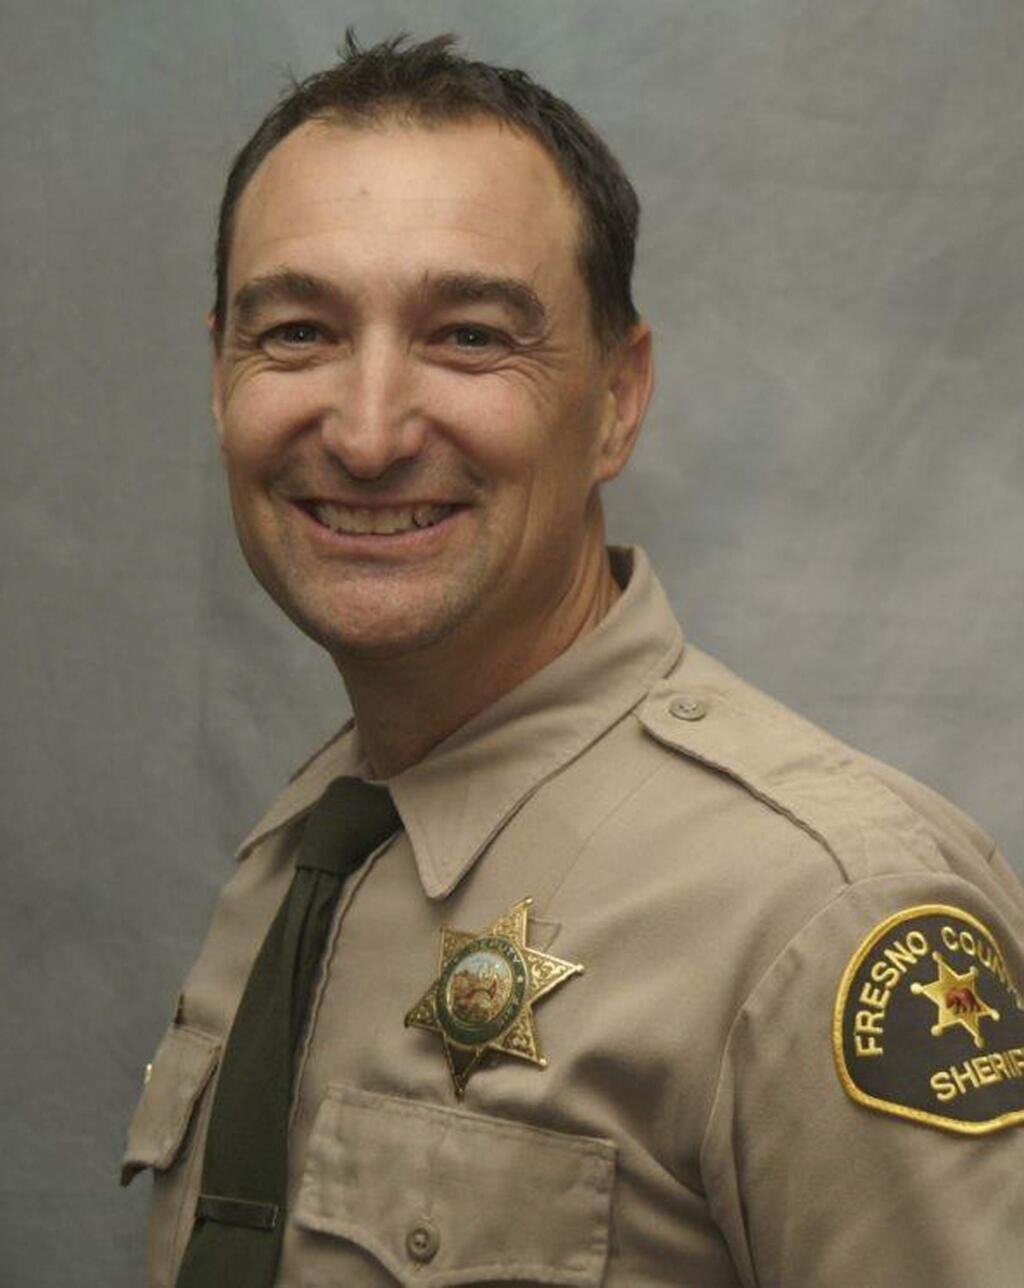 In this undated photo released by the Fresno County Sheriff's Office is Deputy John Erickson. Authorities say a man suspected of shooting the Fresno County Sheriff's deputy who responded to a call about two neighbors arguing over a rural property boundary was arrested after a standoff. The Fresno Bee reports Fresno County Sheriff Margaret Mims says the suspect was arrested Tuesday, July 2, 2019, on suspicion of shooting of 49-year-old Deputy Erickson near the community of Tollhouse, Calif. (Fresno County Sheriff's Office via AP)